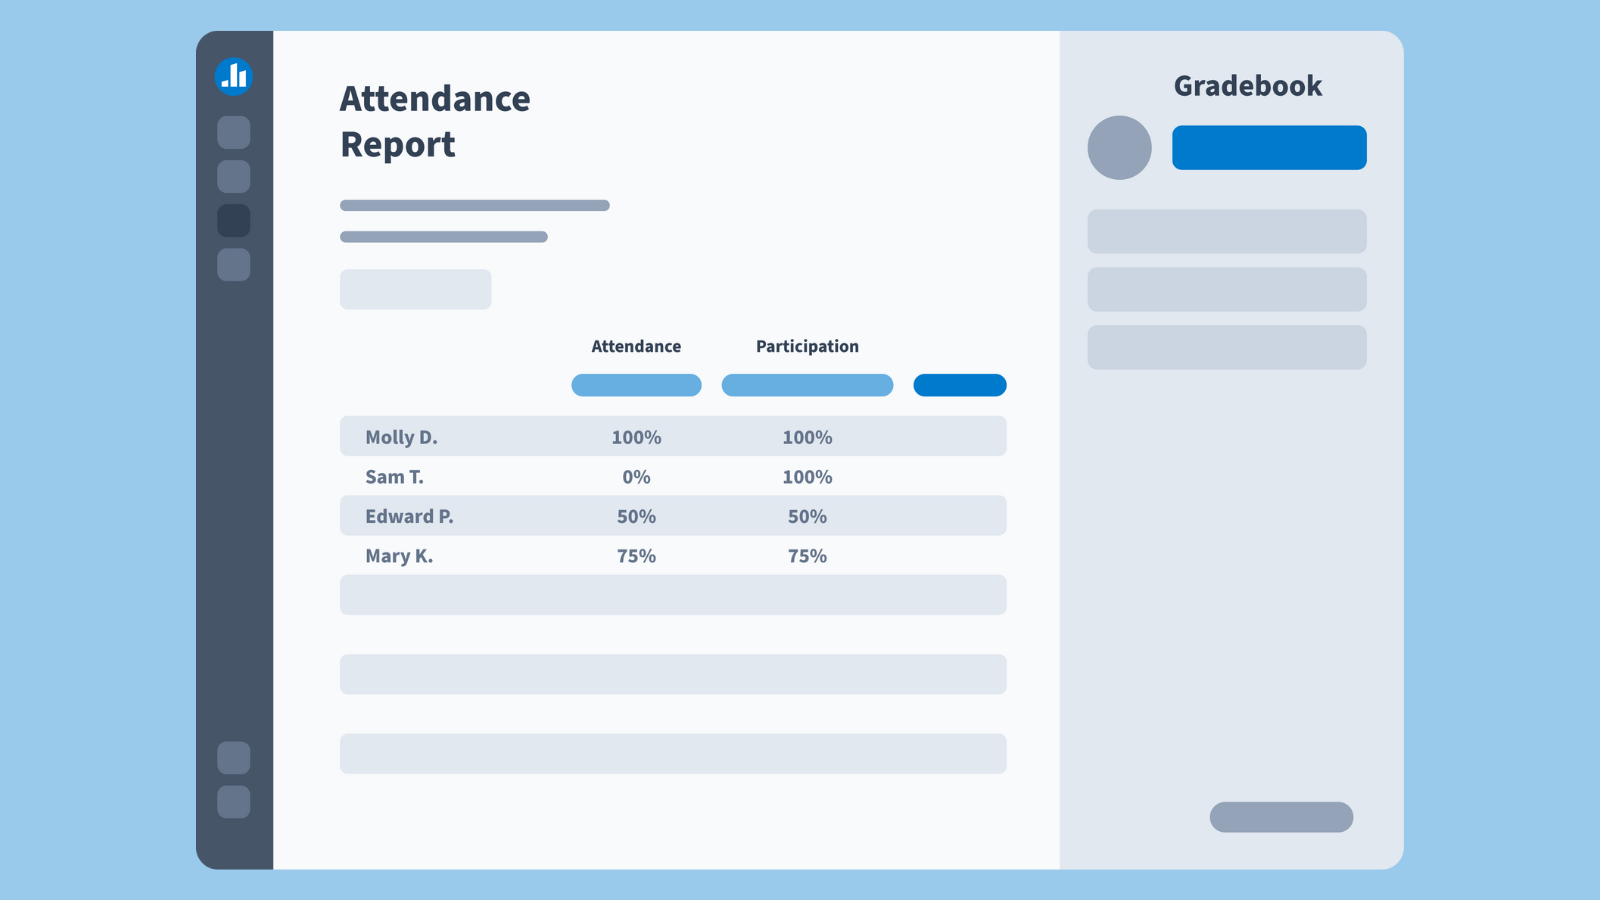 Illustration of Poll Everywhere's attendance report